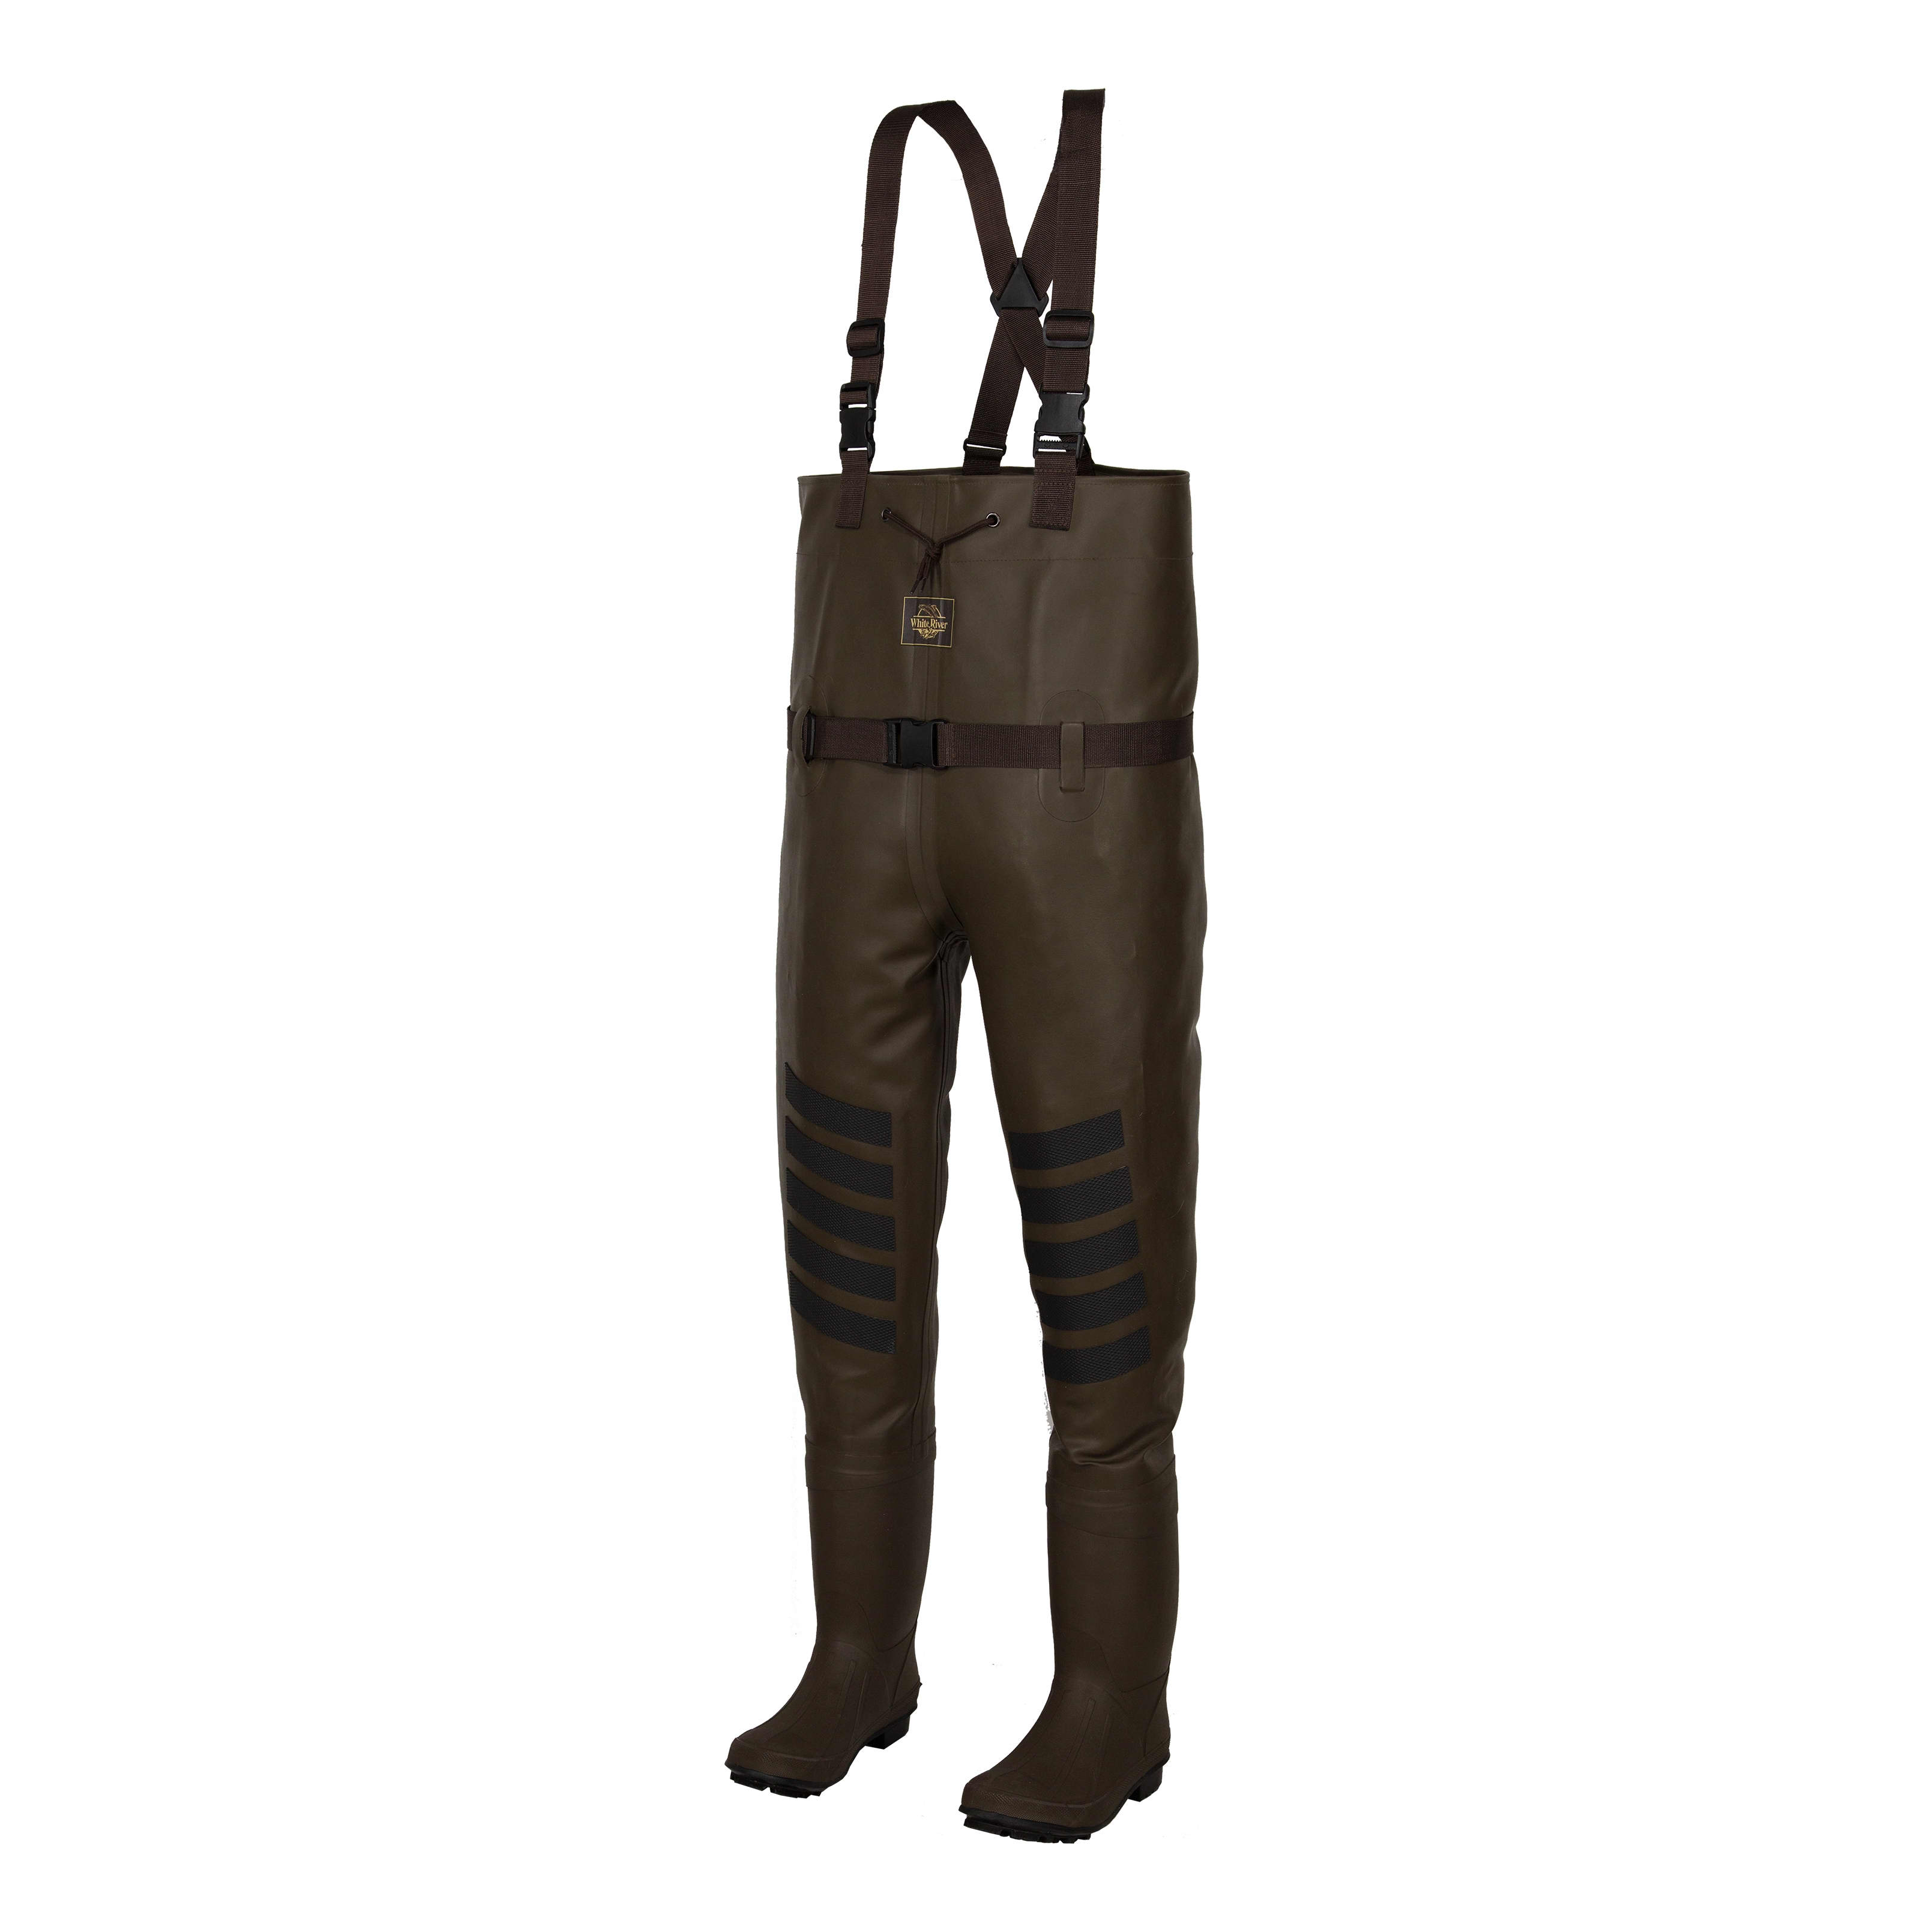 Fishing Chest Waders, Men Waterproof Full Body Rain Suit with Boots Hunting  Bootfoot Waterproof PVC with Wading Belt One-Piece Fishing Suit,Dark